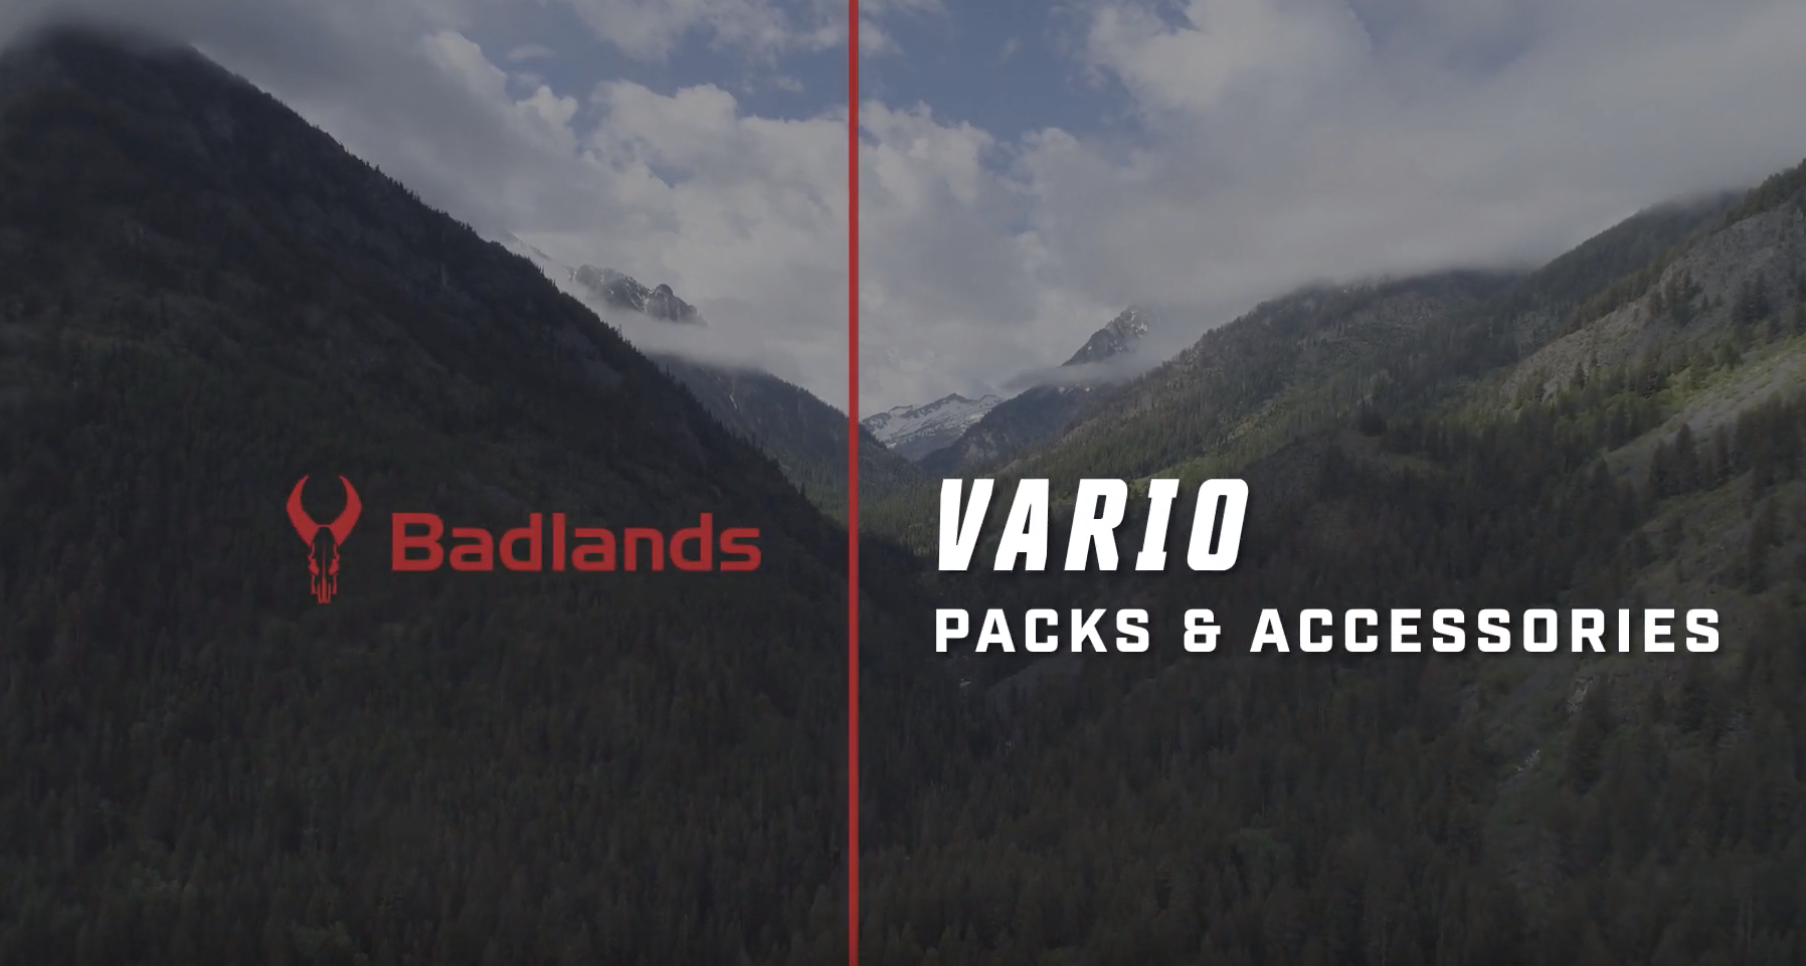 Learn more about Vario Accessories